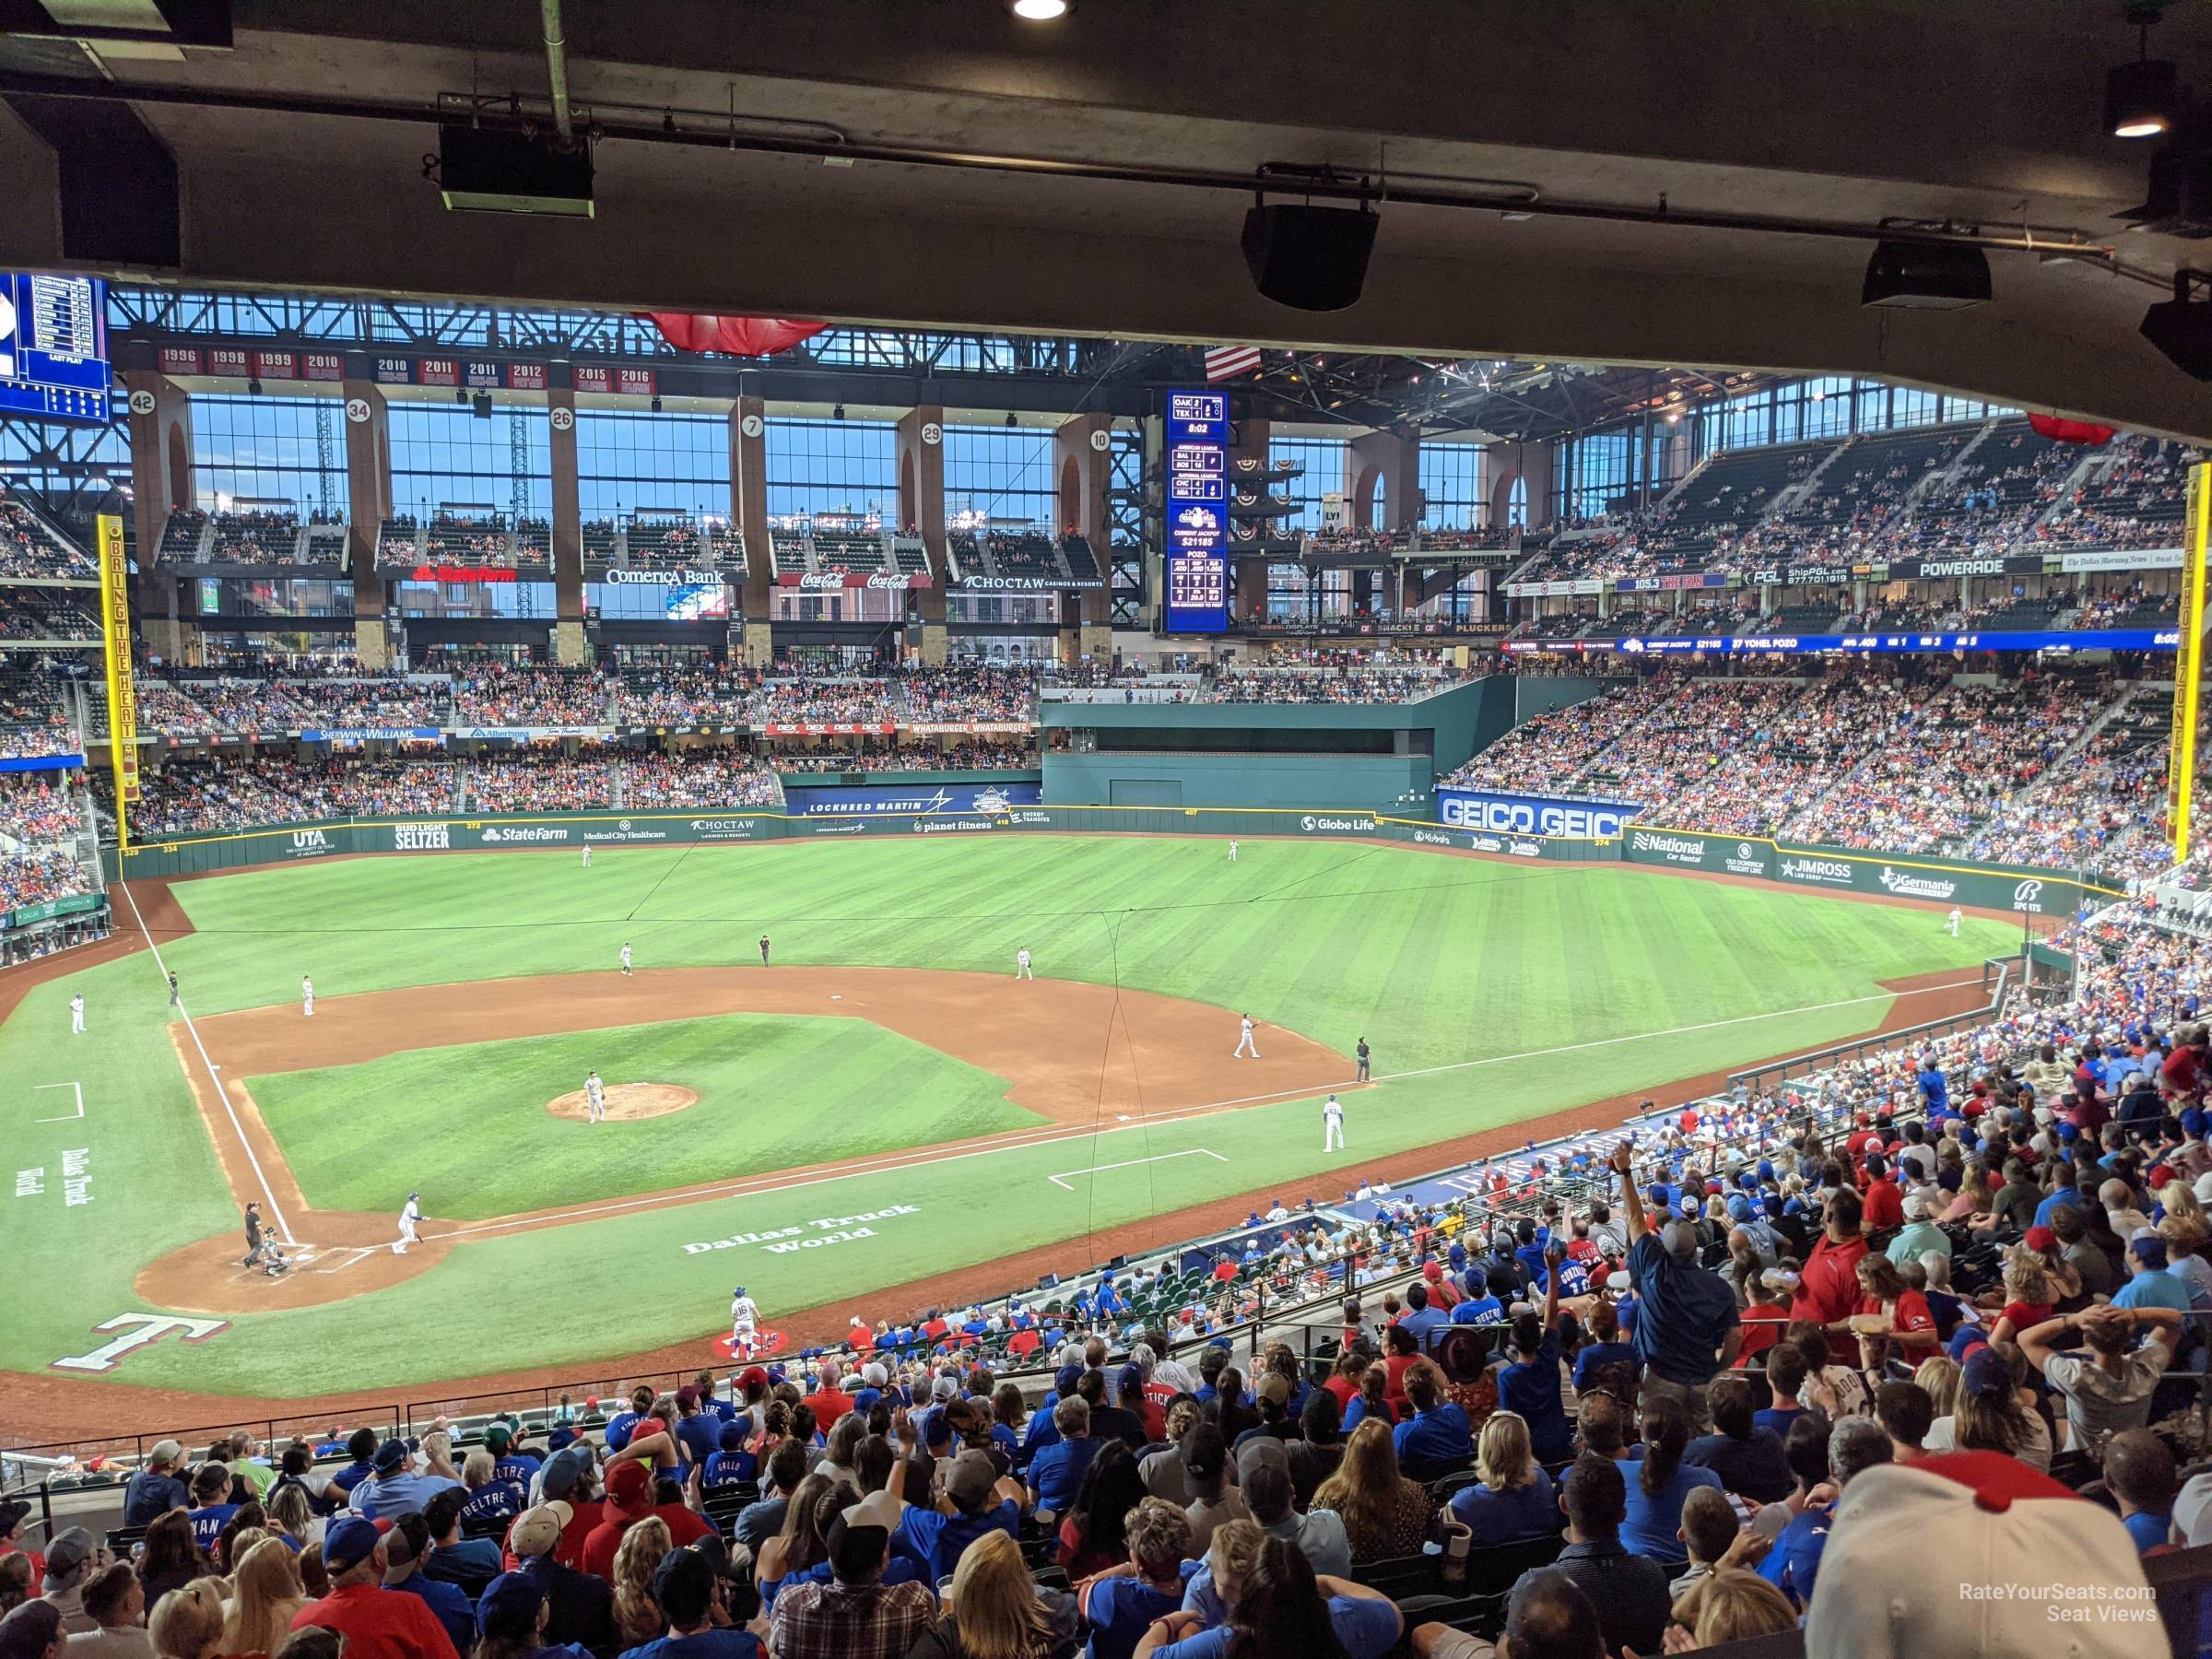 Section 117 at Globe Life Field